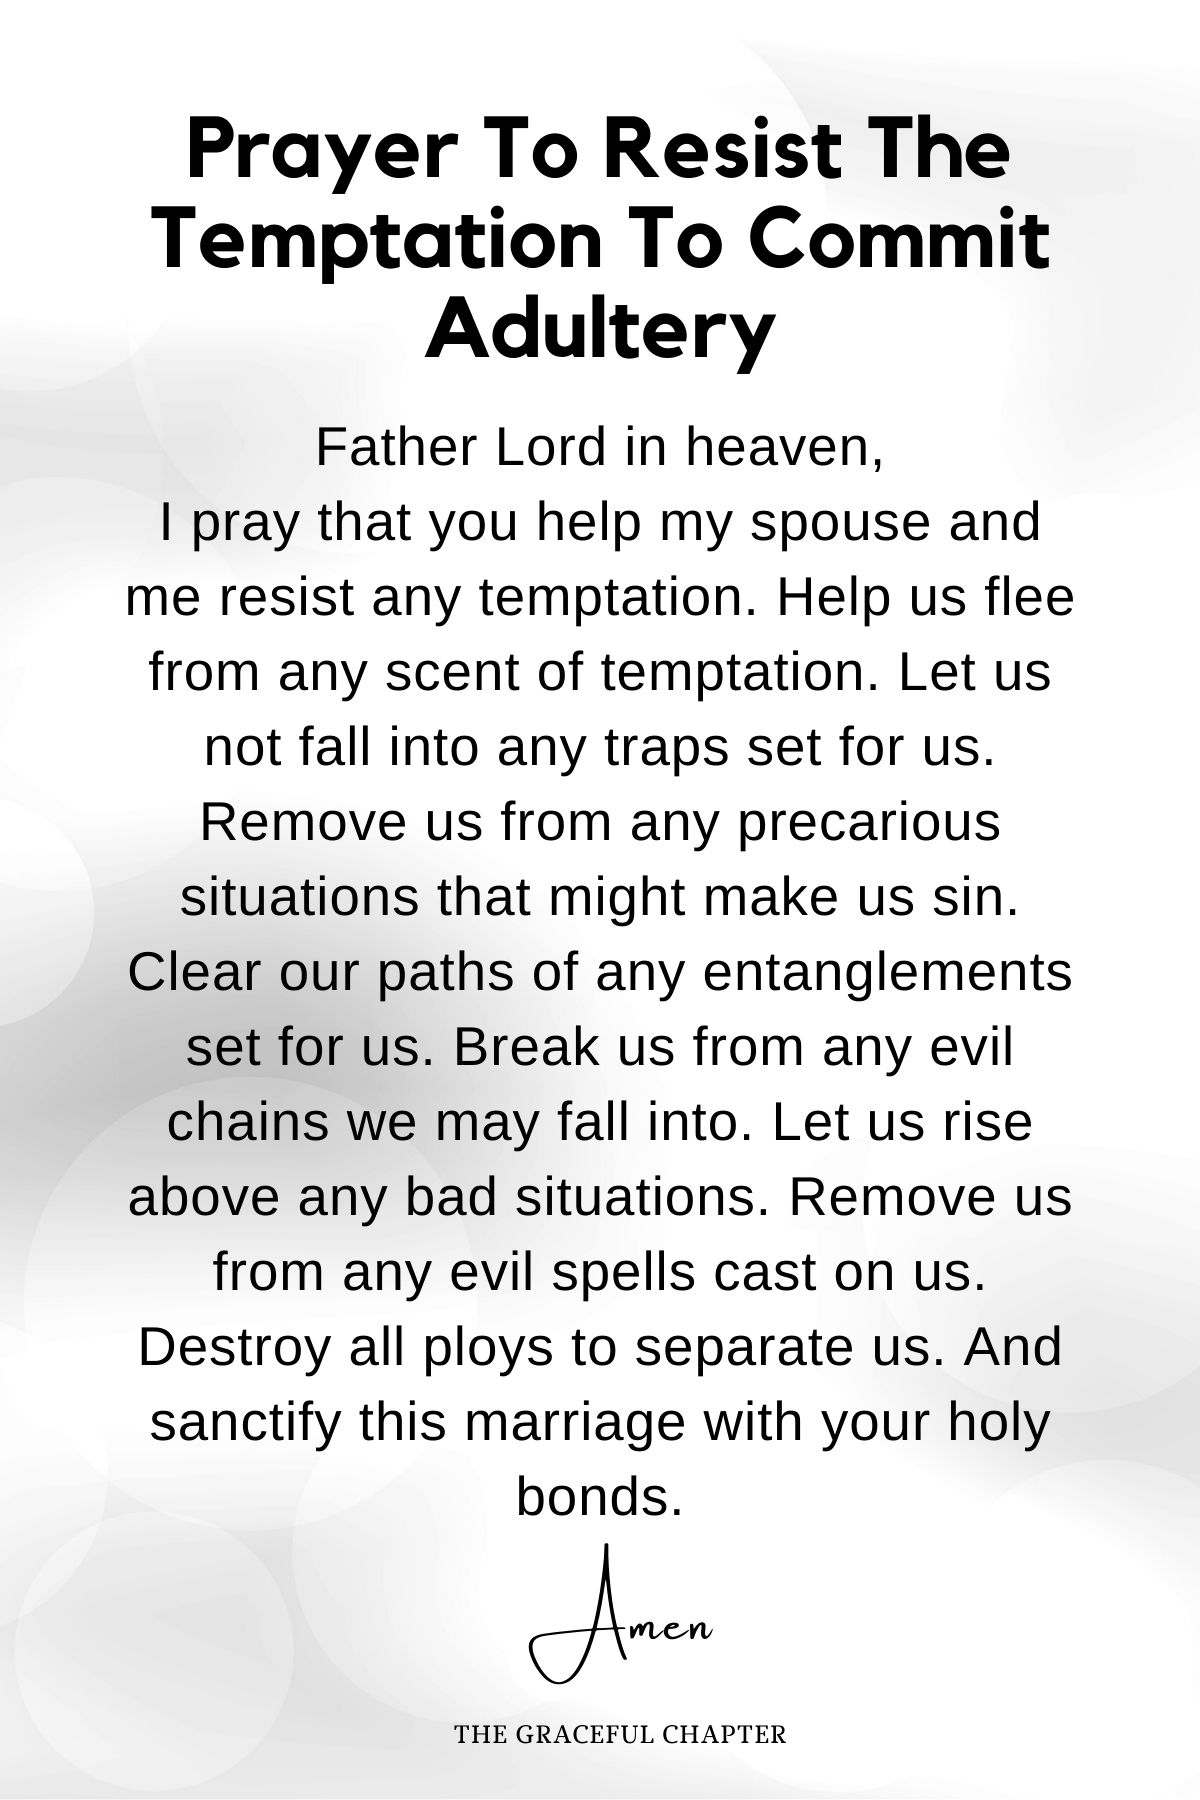 Prayer to resist the temptation to commit adultery